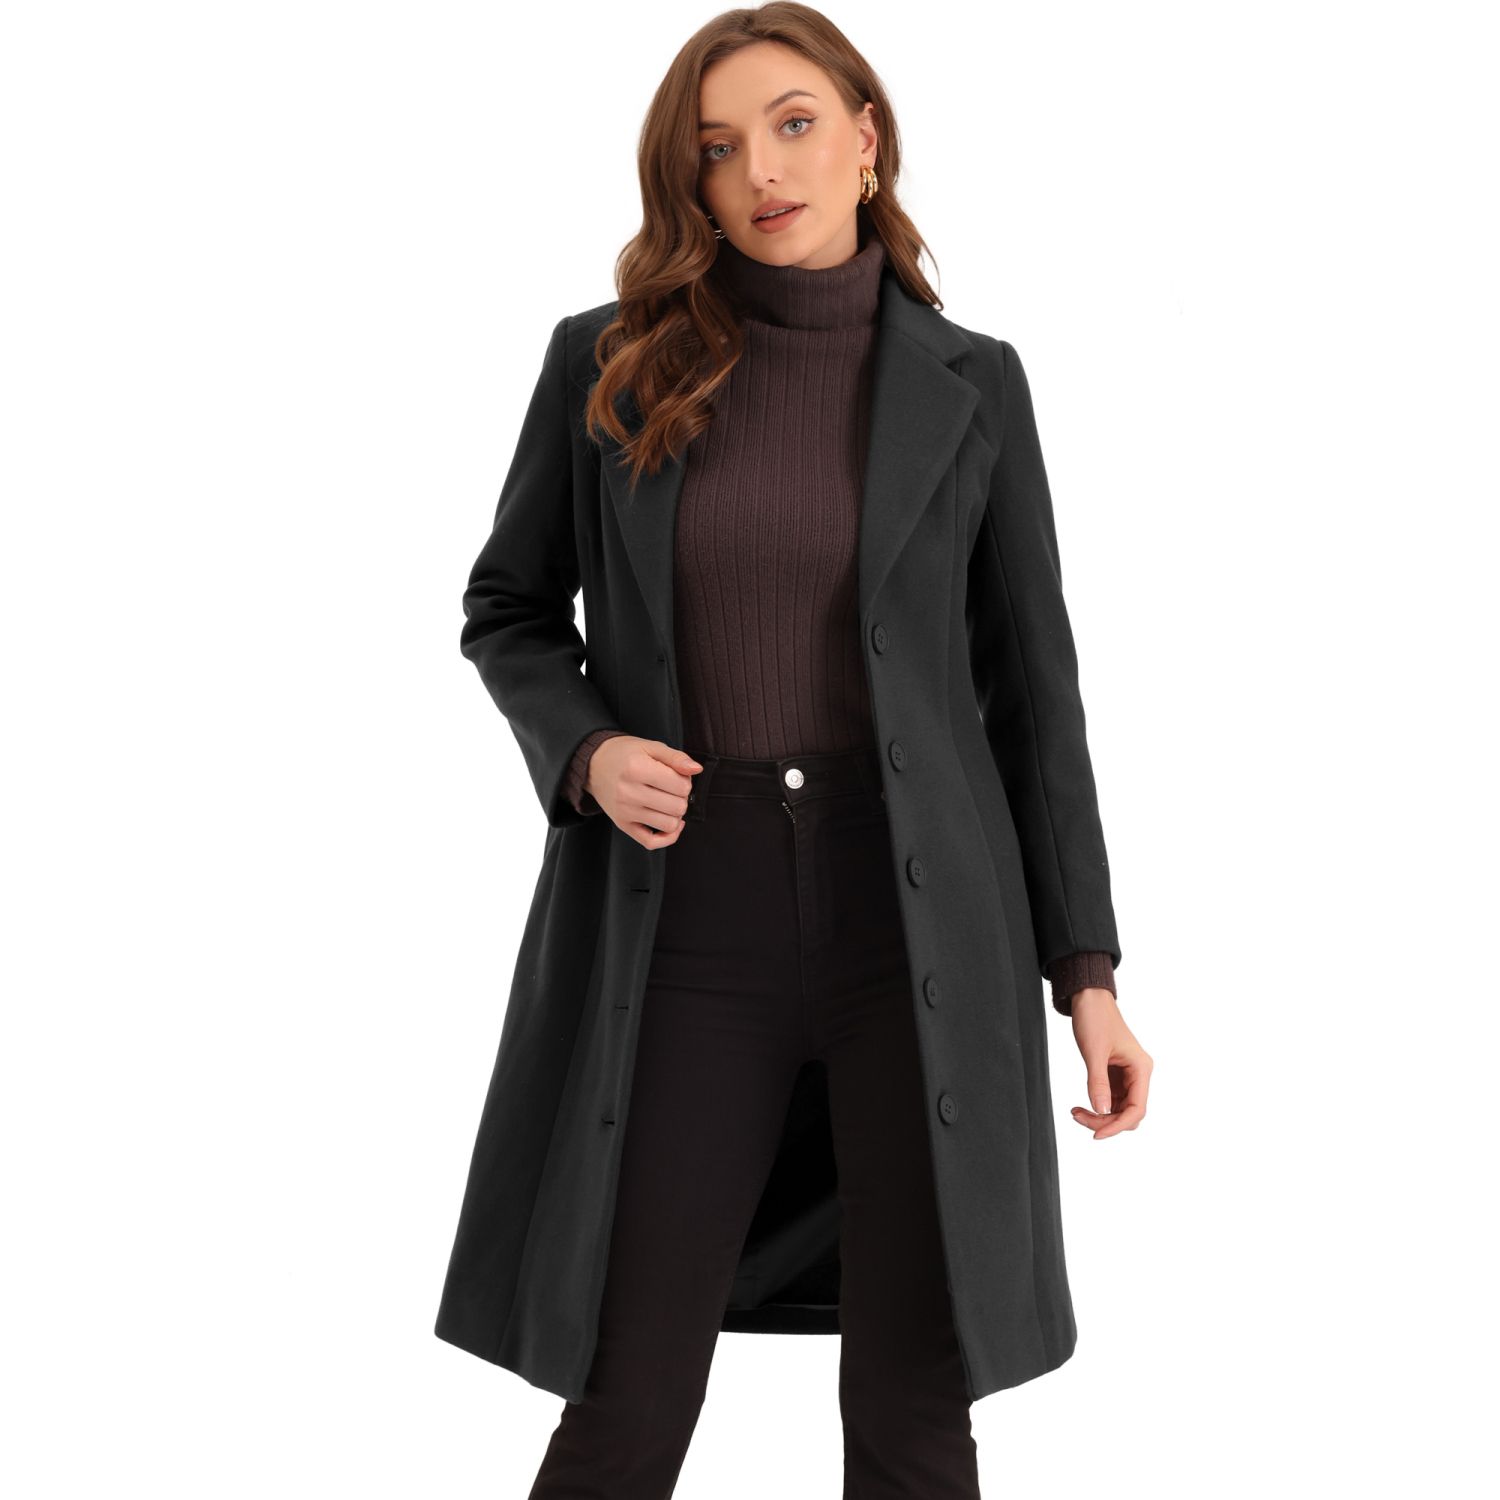 Agnes Orinda Women's Plus Size Winter Notched Lapel Double Breasted Long  Overcoats Navy Blue 1X